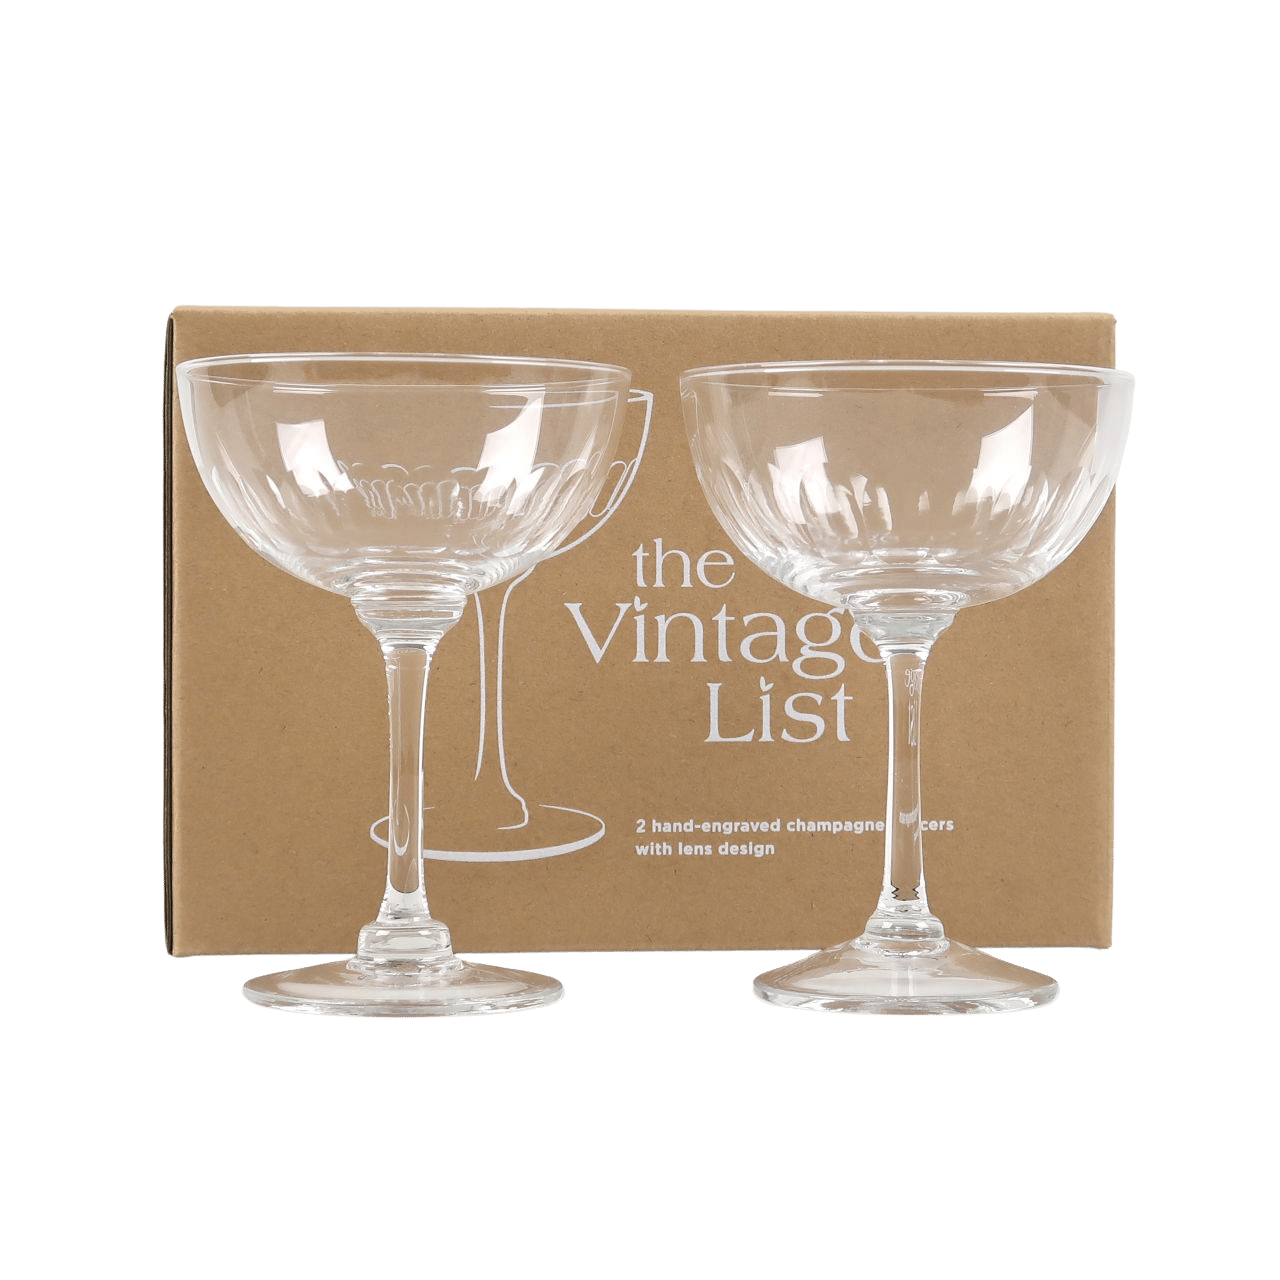 The Vintage List Box of 2 Etched Lens Design Champagne Coupes